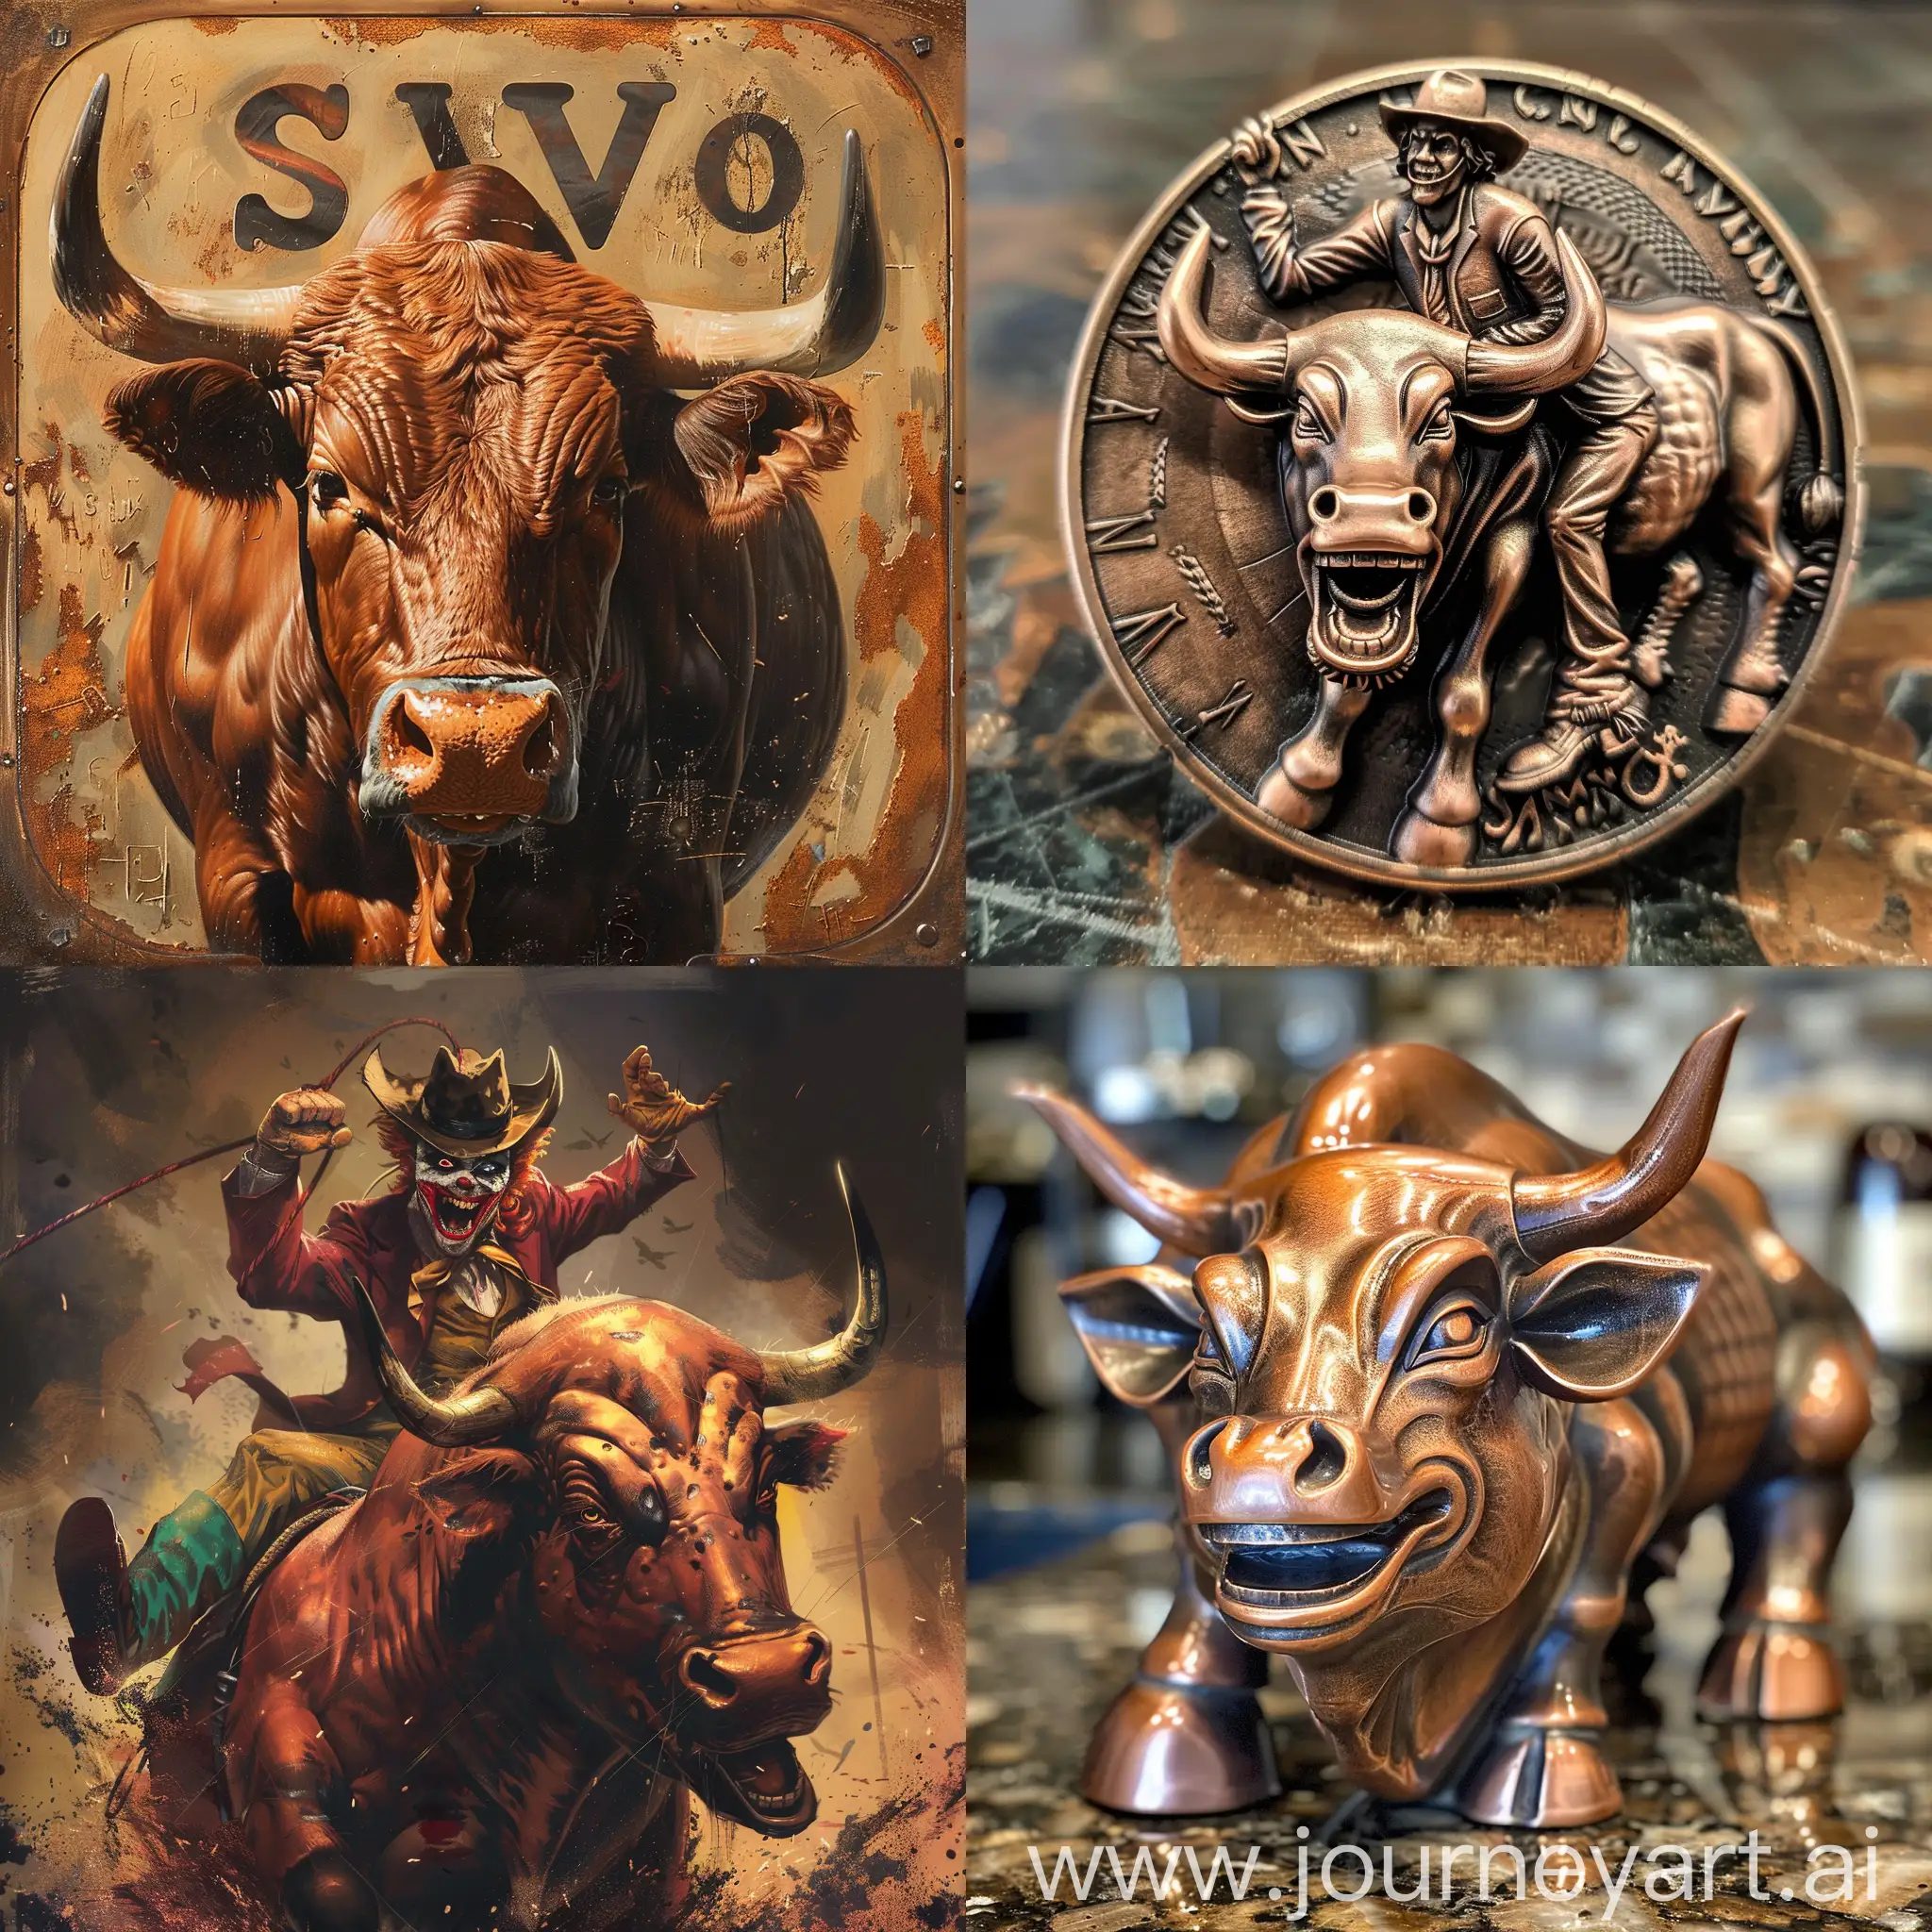 Colorful-Joker-Performing-on-Copper-Bull-Statue